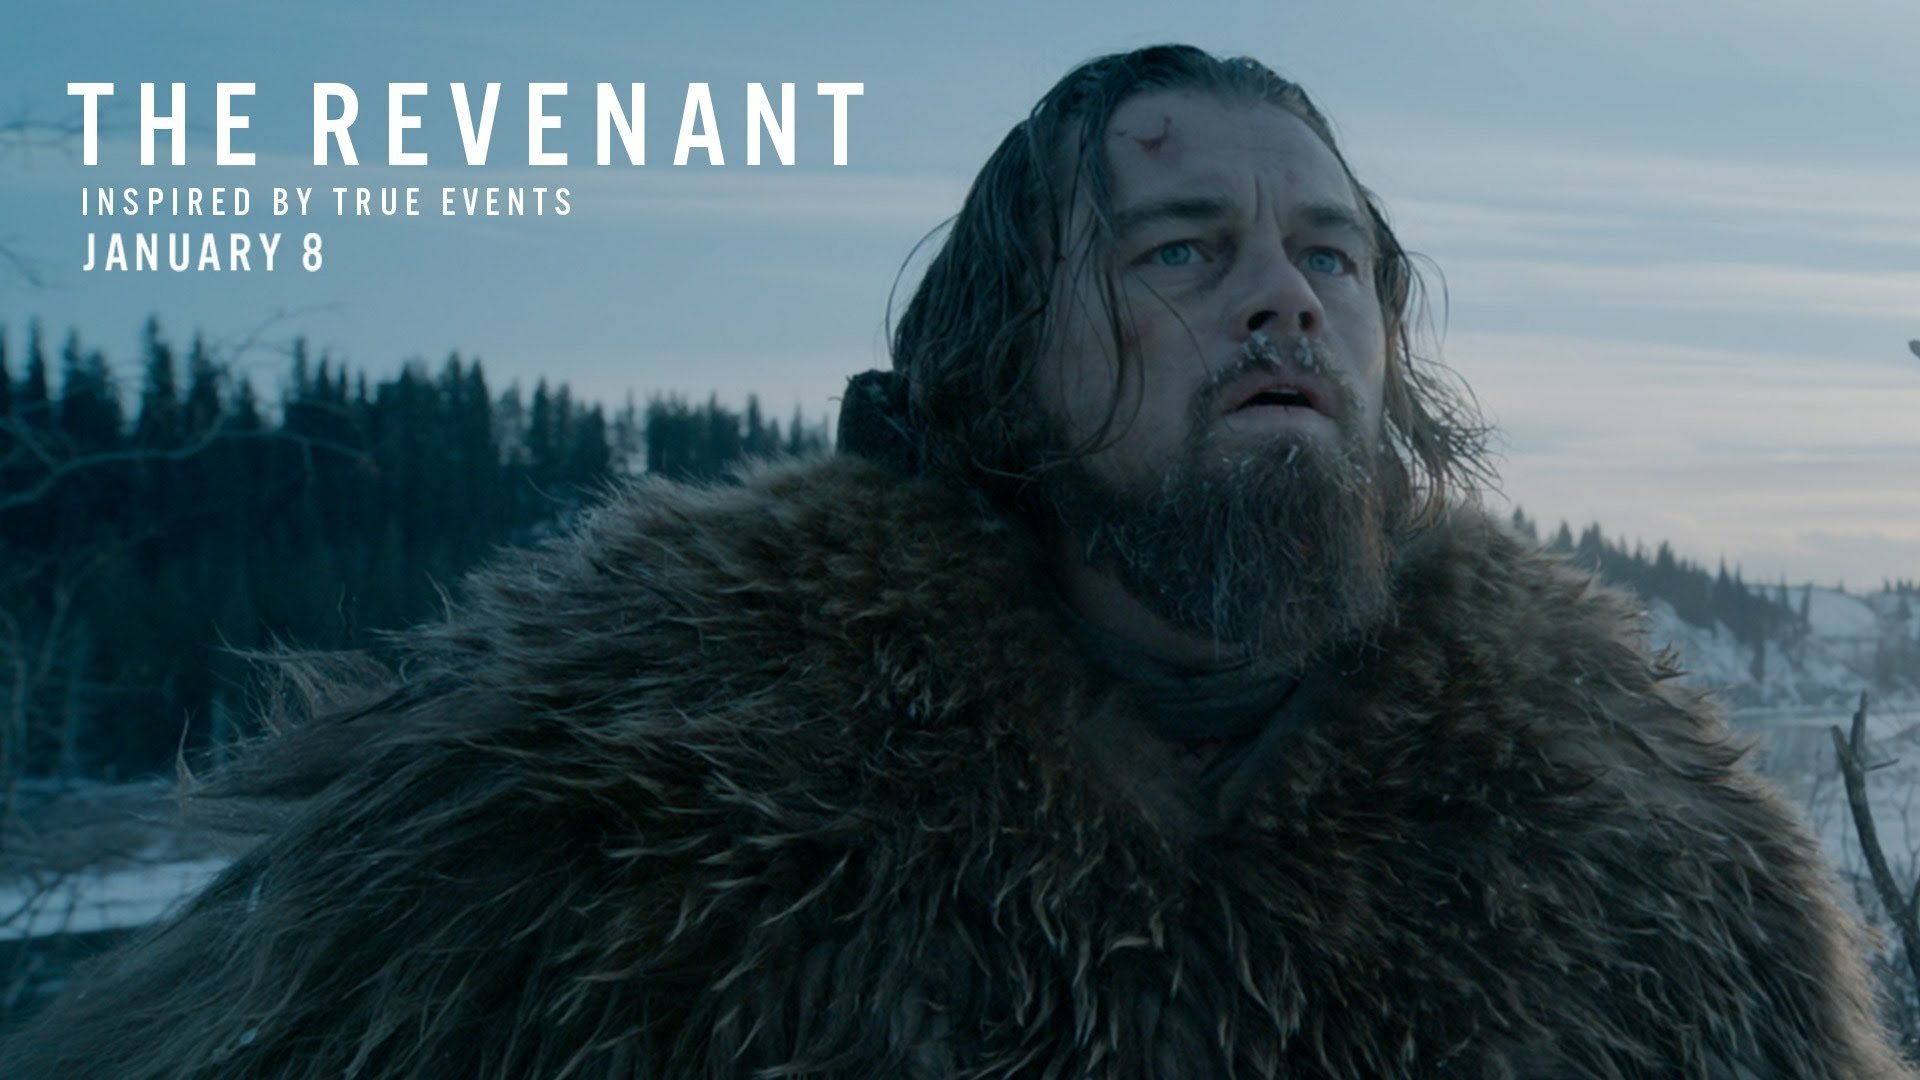 the revenant movie watch online free hd